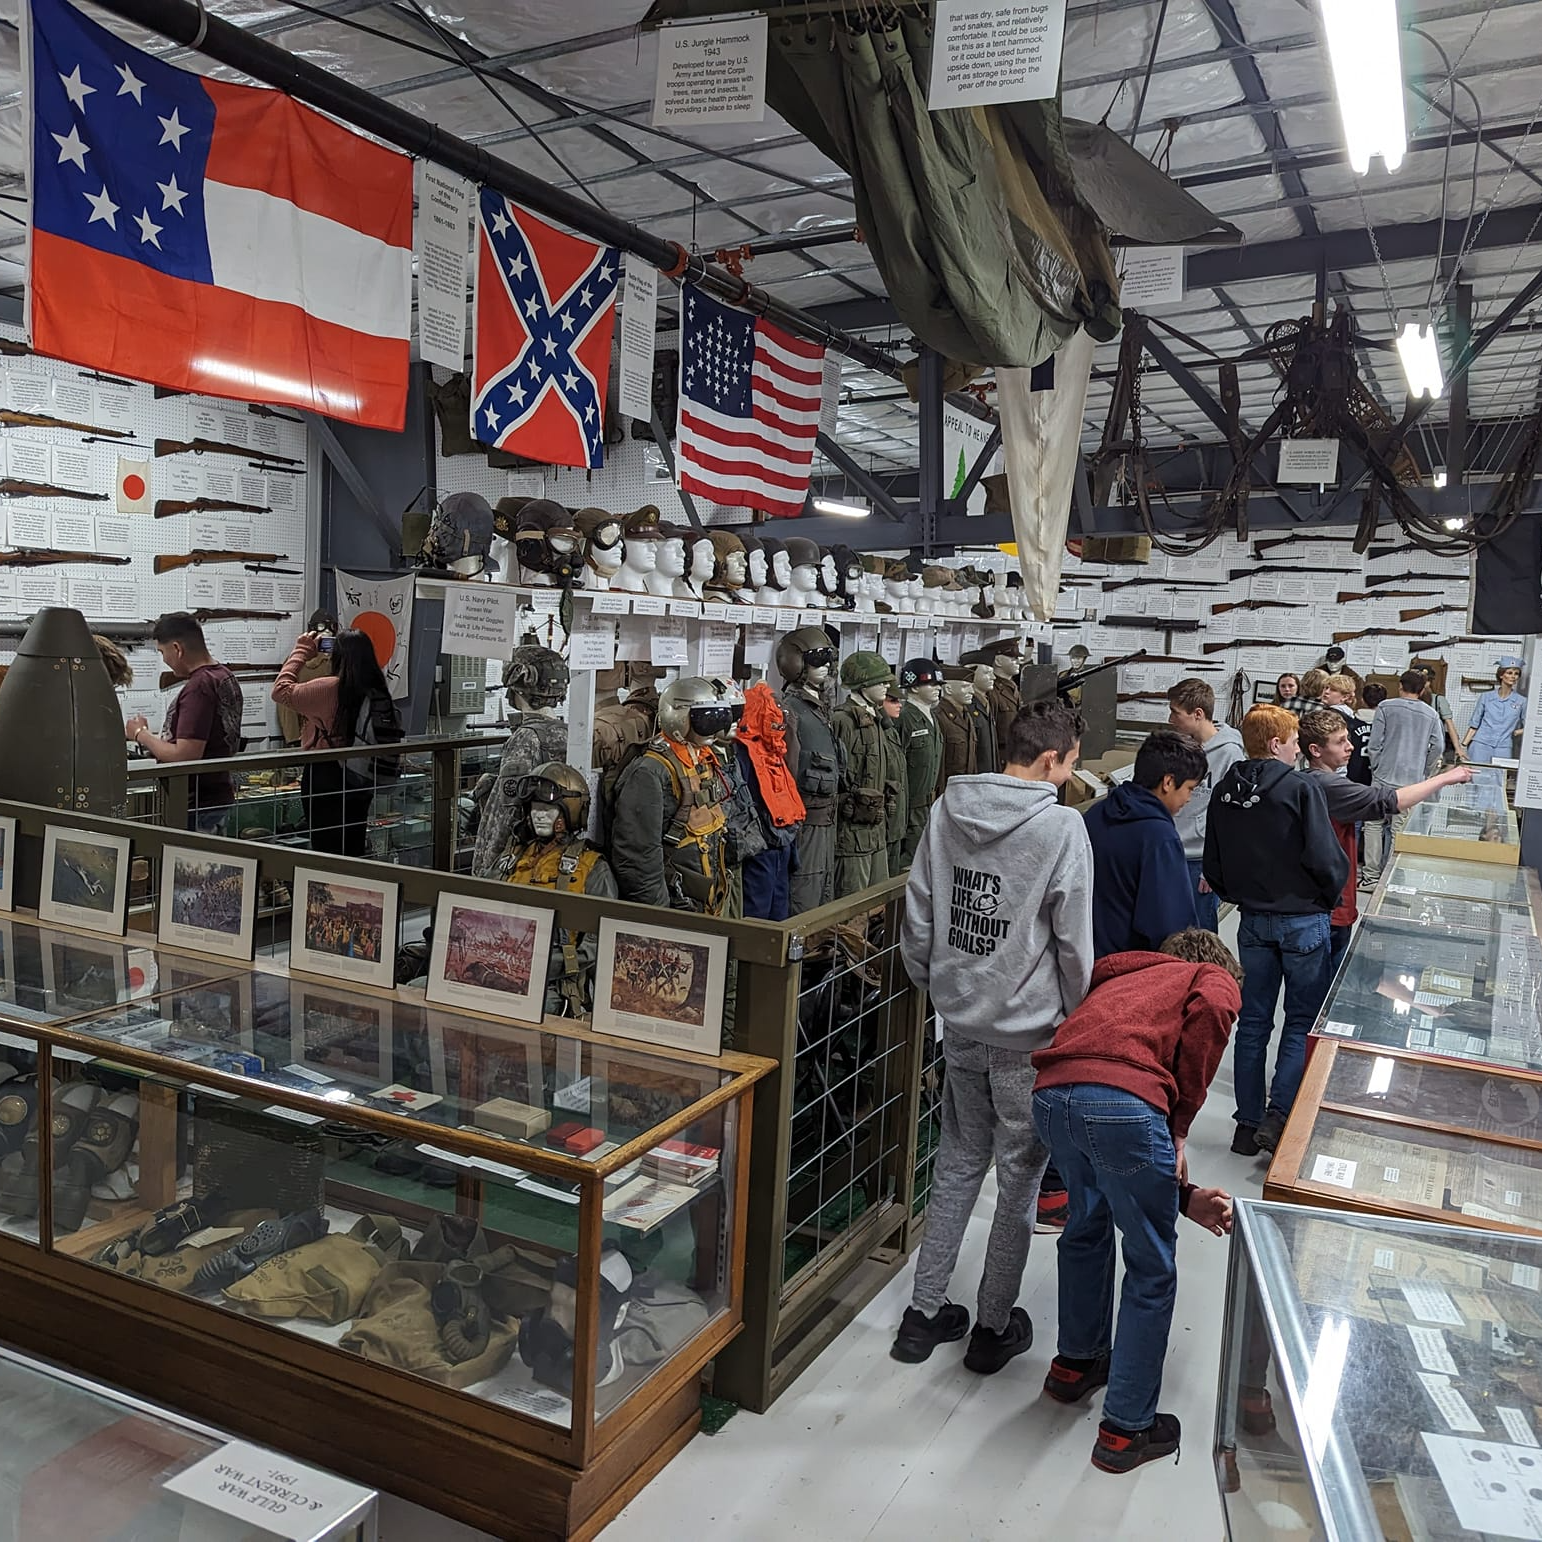 Teens explore the second floor of the museum with military flags, uniforms, and gear - some in enclosed glass cabinets.